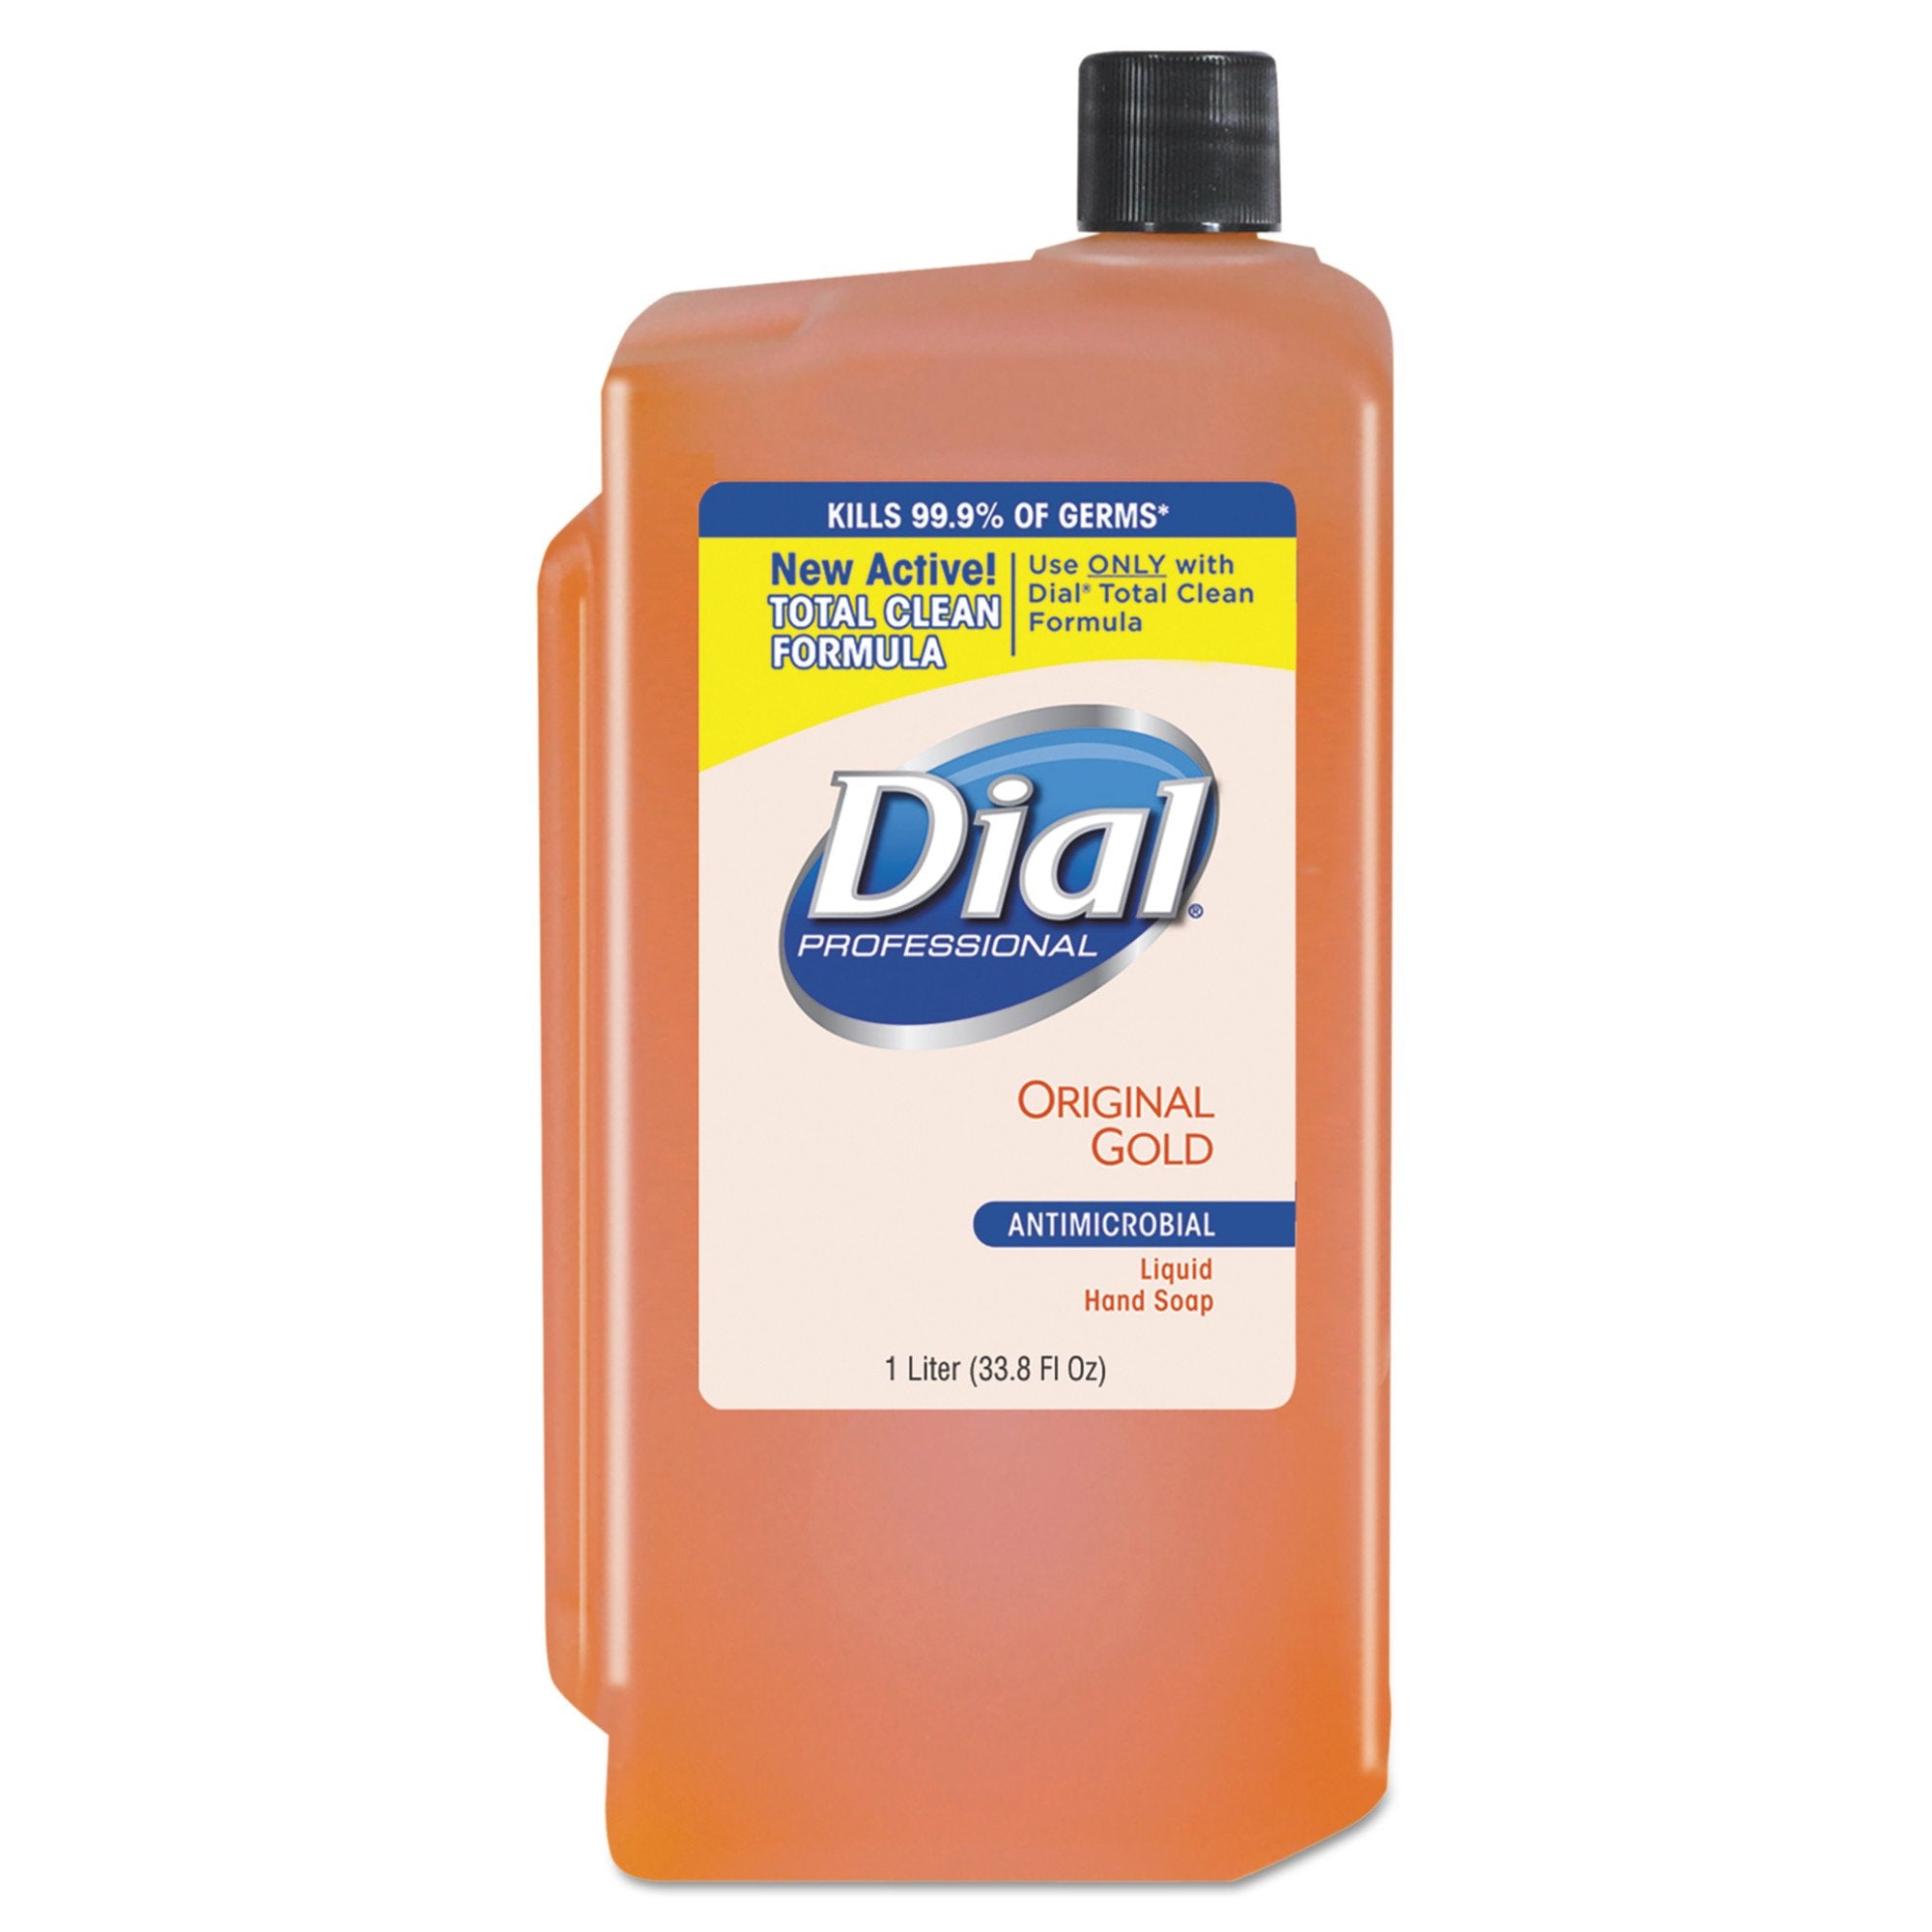 Dial Professional Antimicrobial Soap